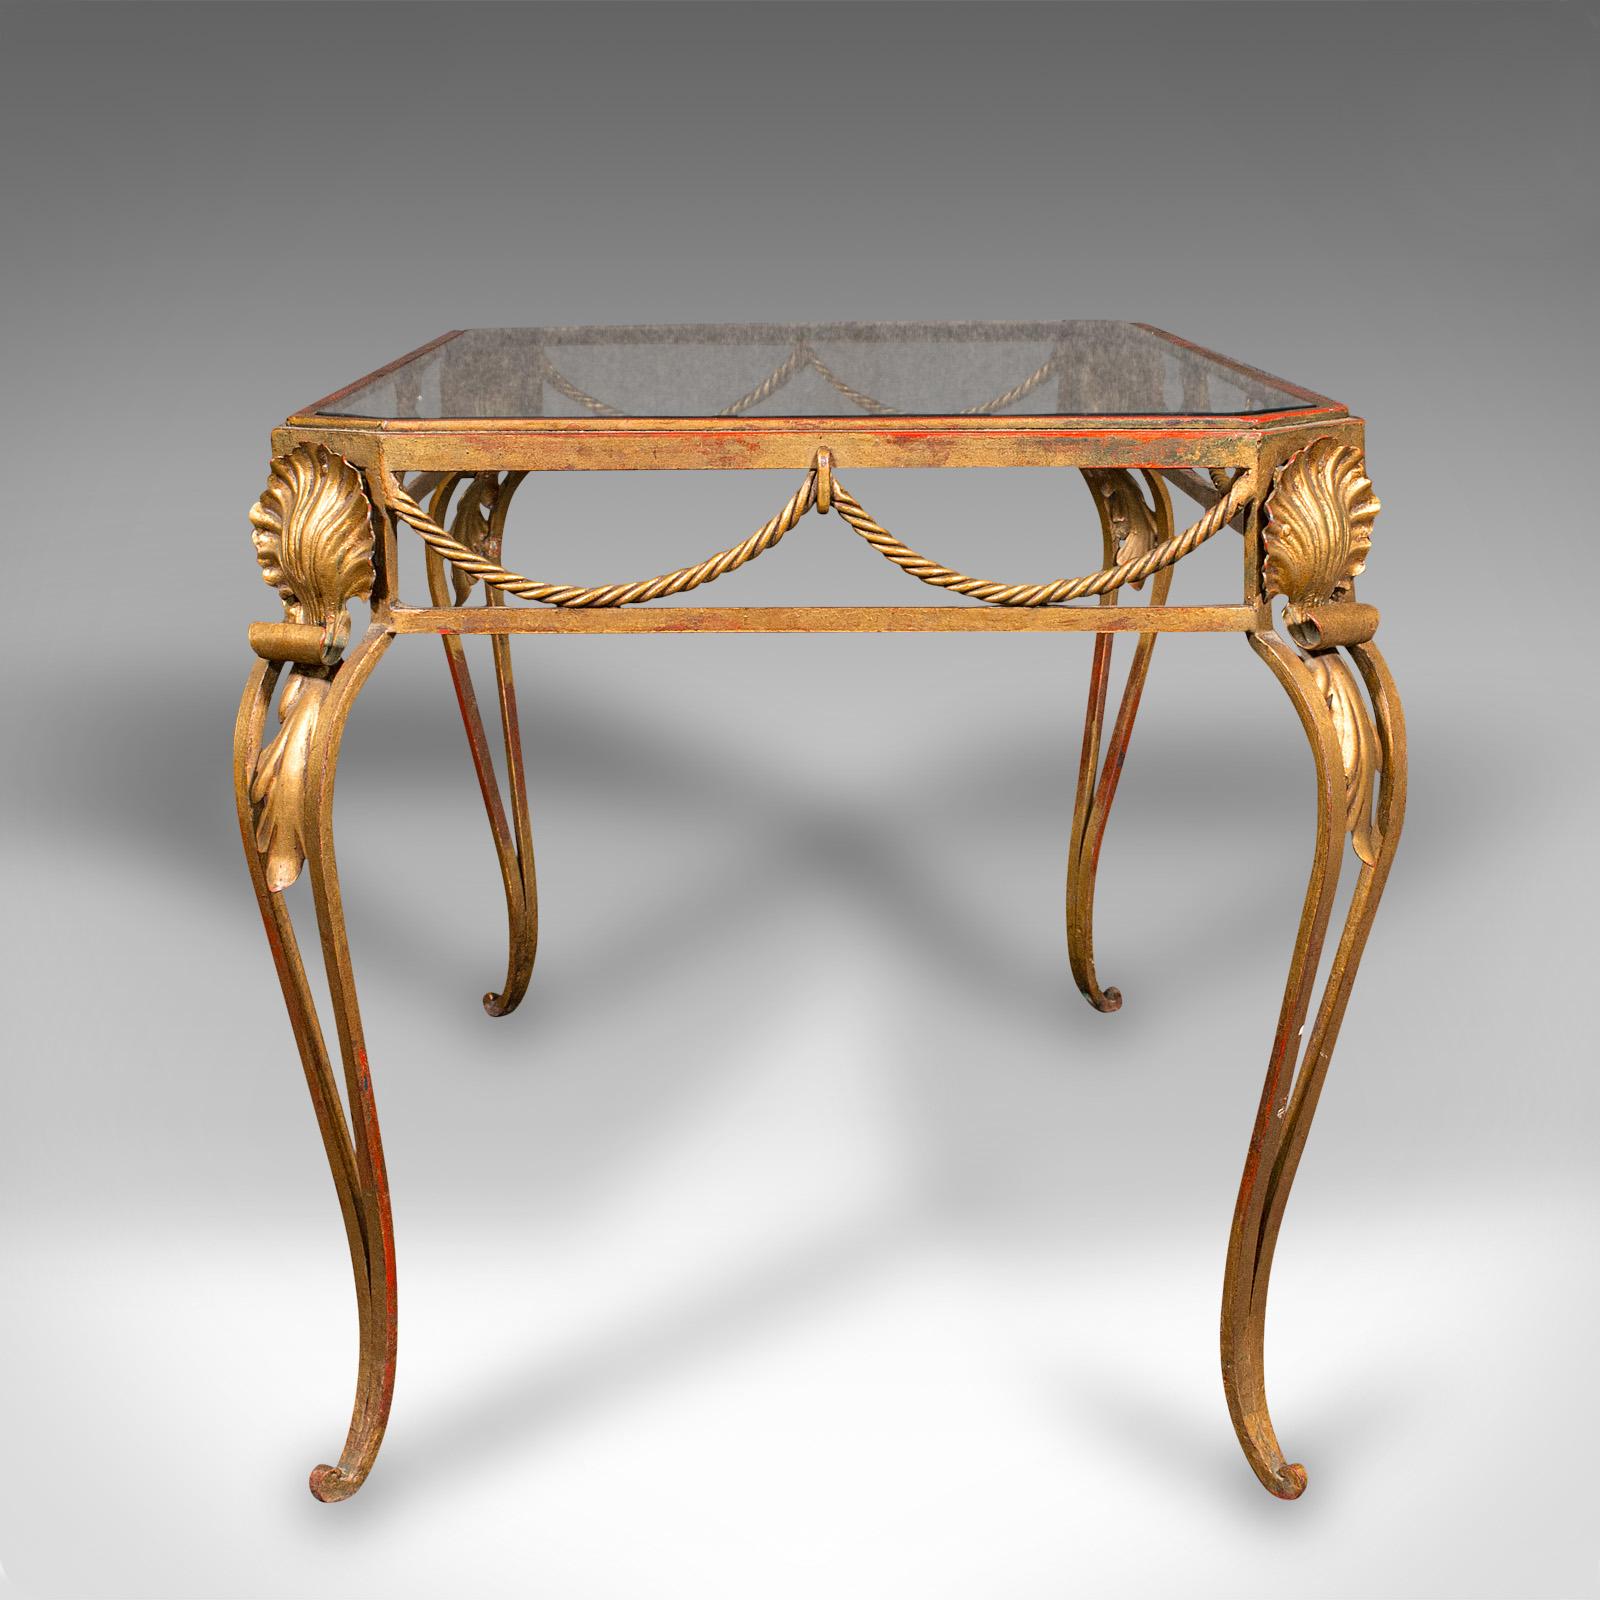 Antique Glazed Coffee Table, French, Brass, Art Nouveau, Early 20th, Circa 1920 In Good Condition For Sale In Hele, Devon, GB